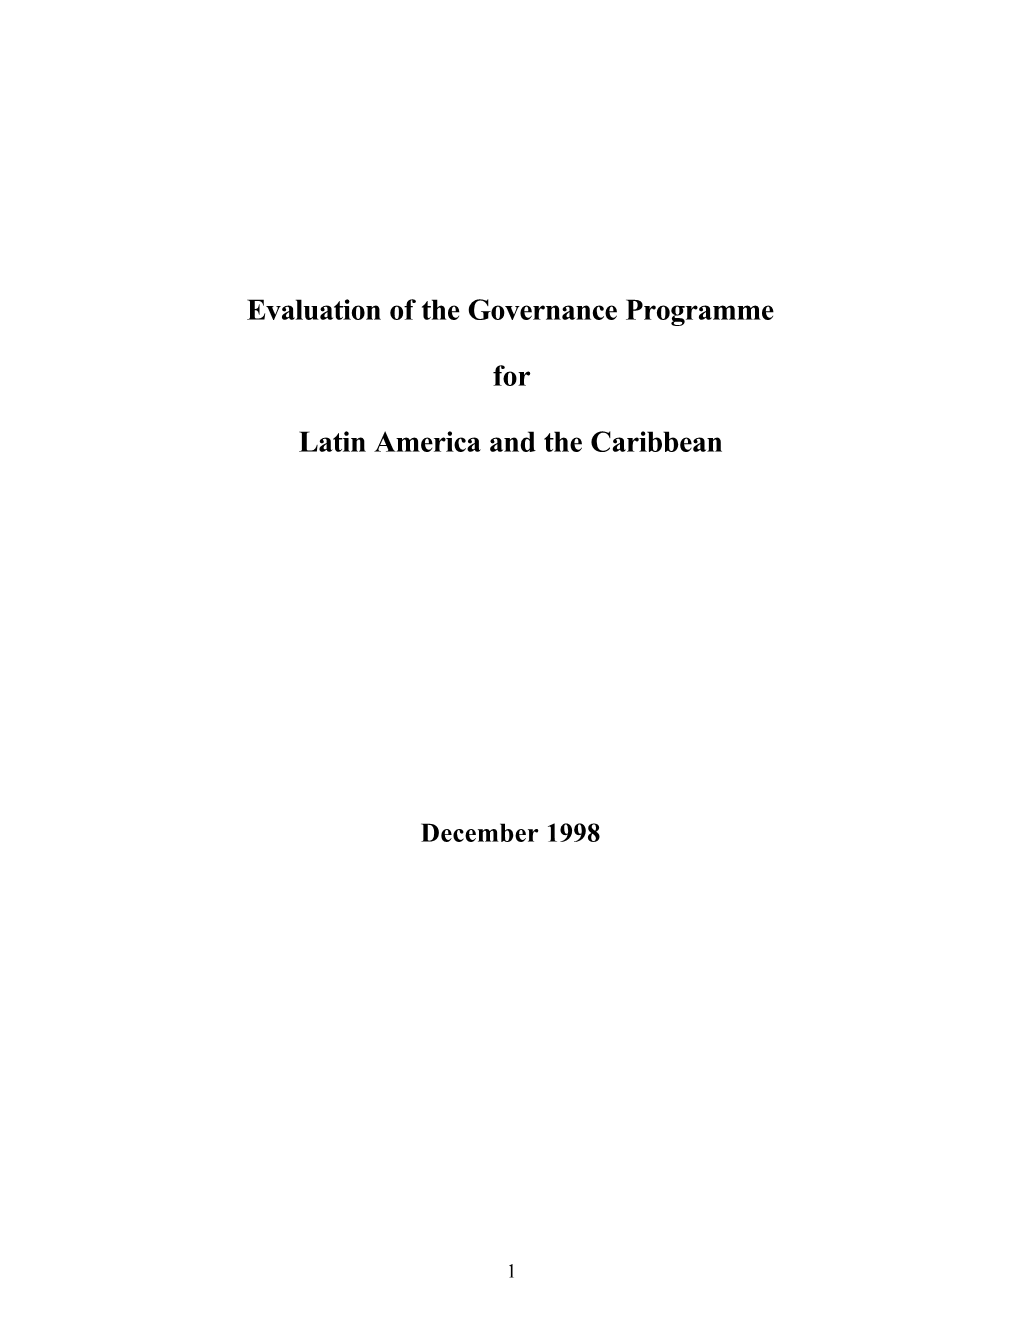 Evaluation of the Governance Programme for Latin America And